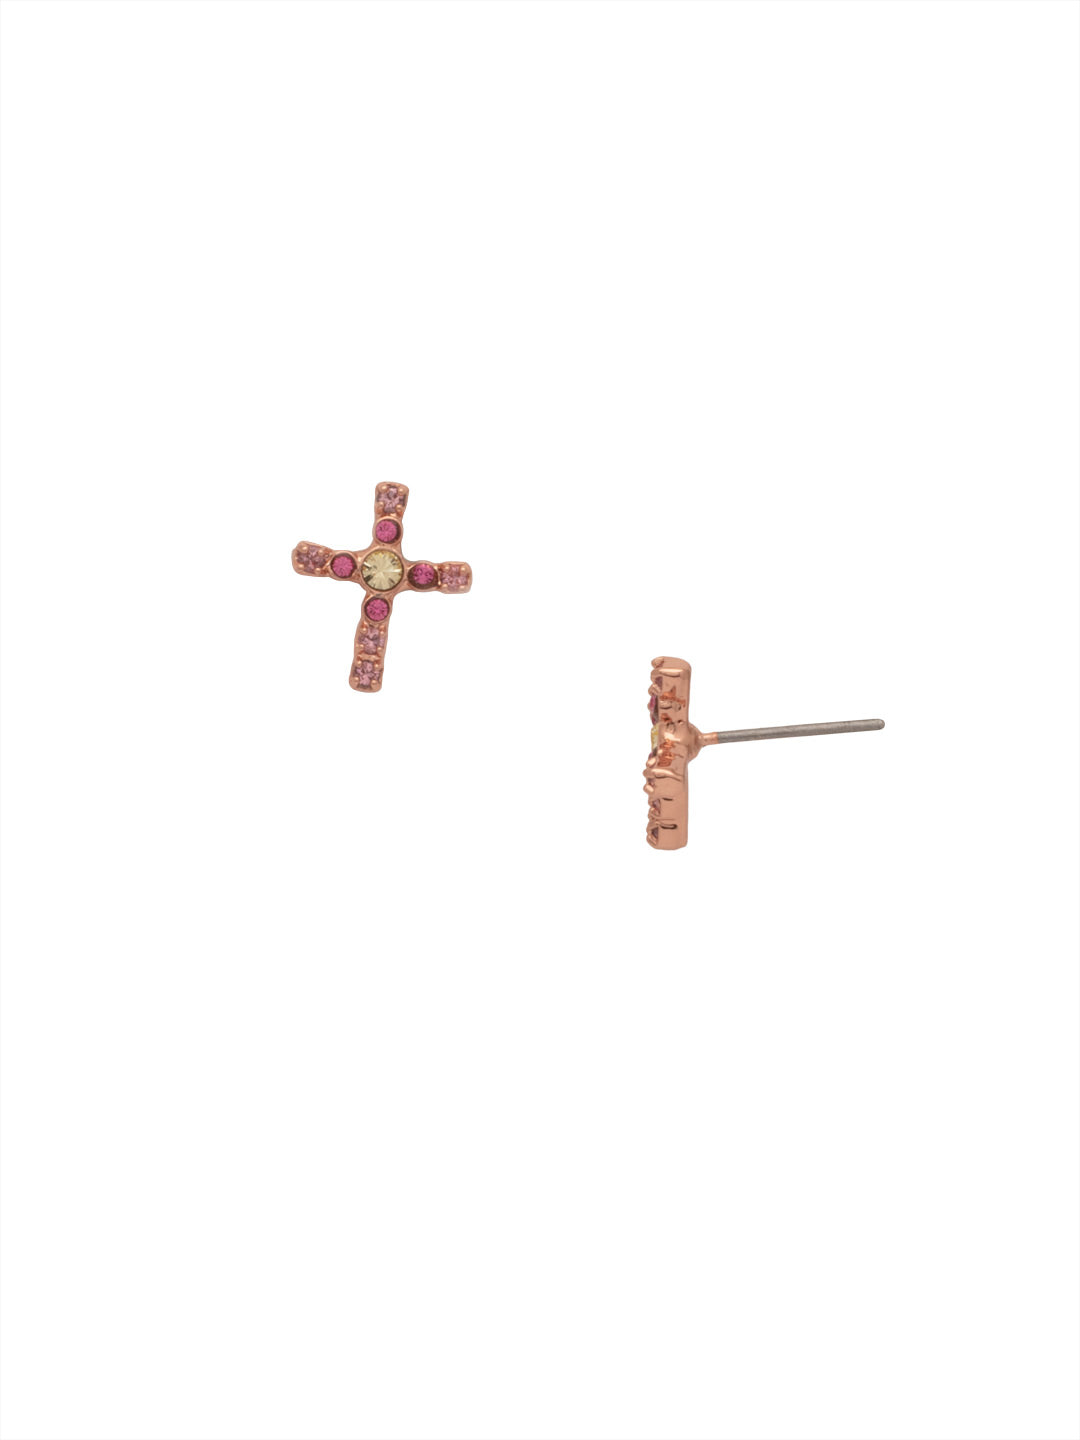 Miley Cross Stud Earring - EEN1RGPPN - <p>The Miley Stud Earrings are the easy go-to pair for both cross and crystal-bling lovers. They feature both and are a win-win. From Sorrelli's Pink Pineapple collection in our Rose Gold-tone finish.</p>